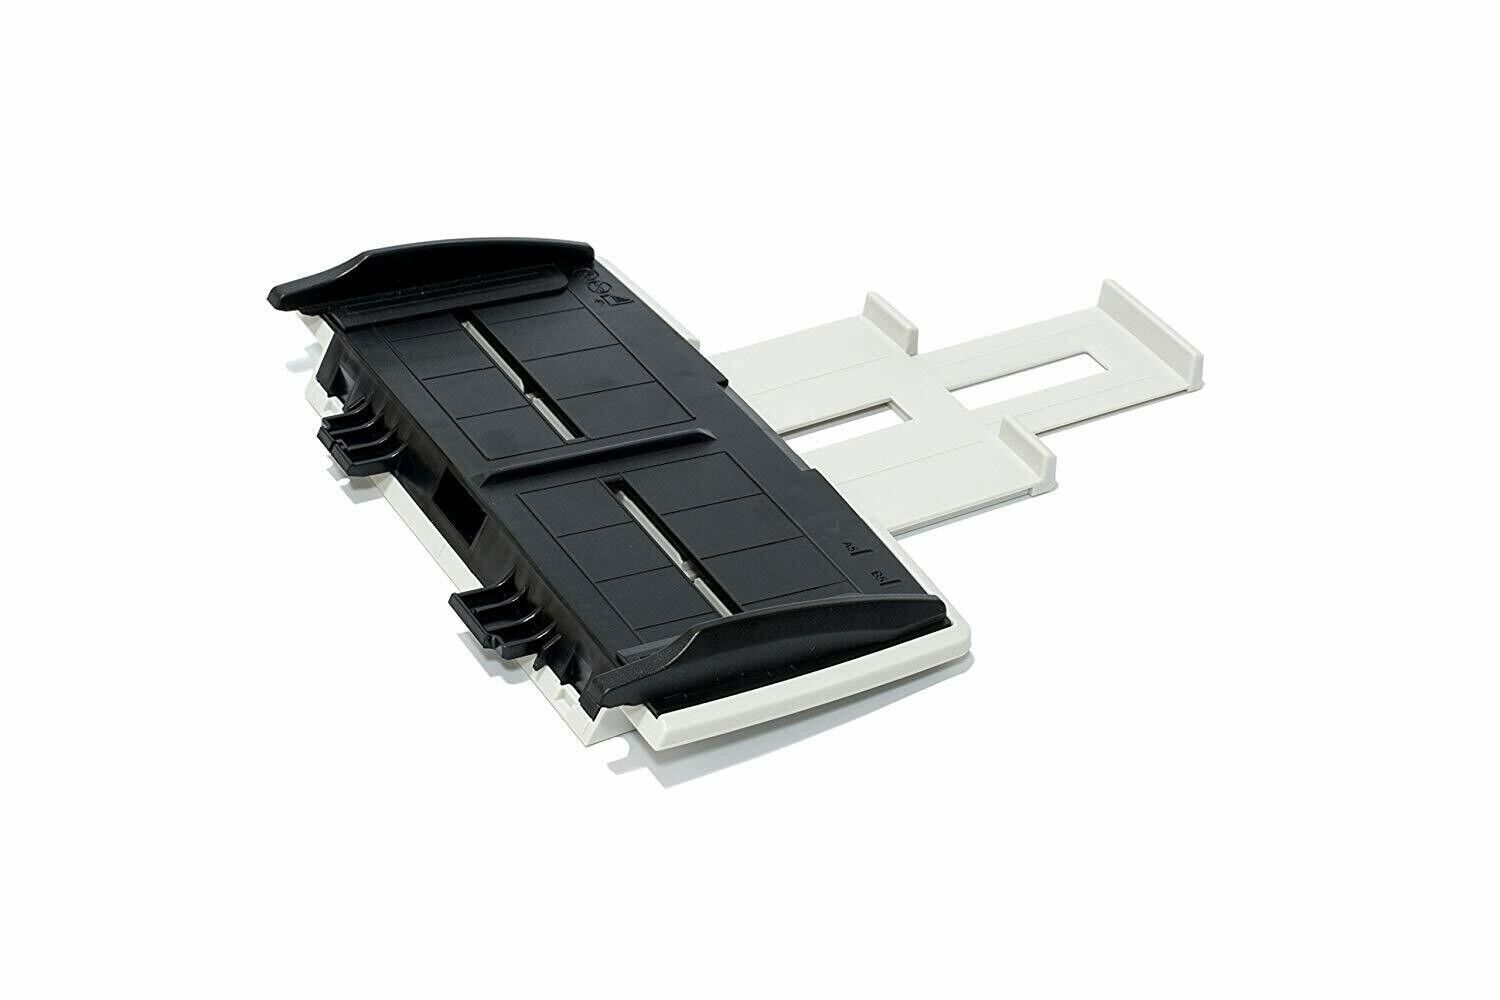 NEW OEM Input ADF Paper Chute Up Tray Feeder For Fujitsu Document Scanner